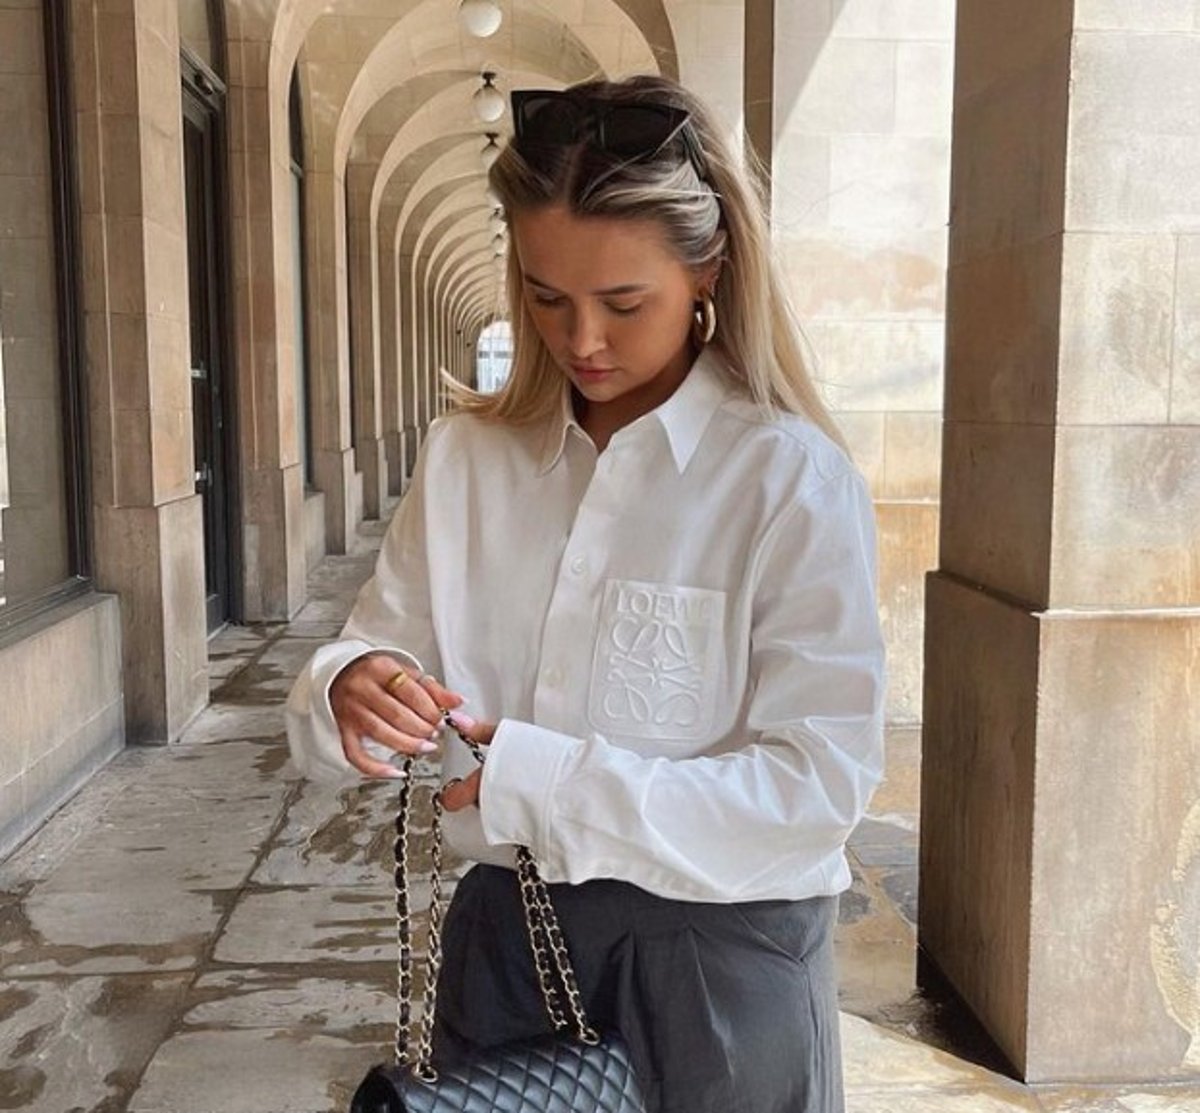 Molly-Mae Hague dons £10,000 worth of designer items on day out